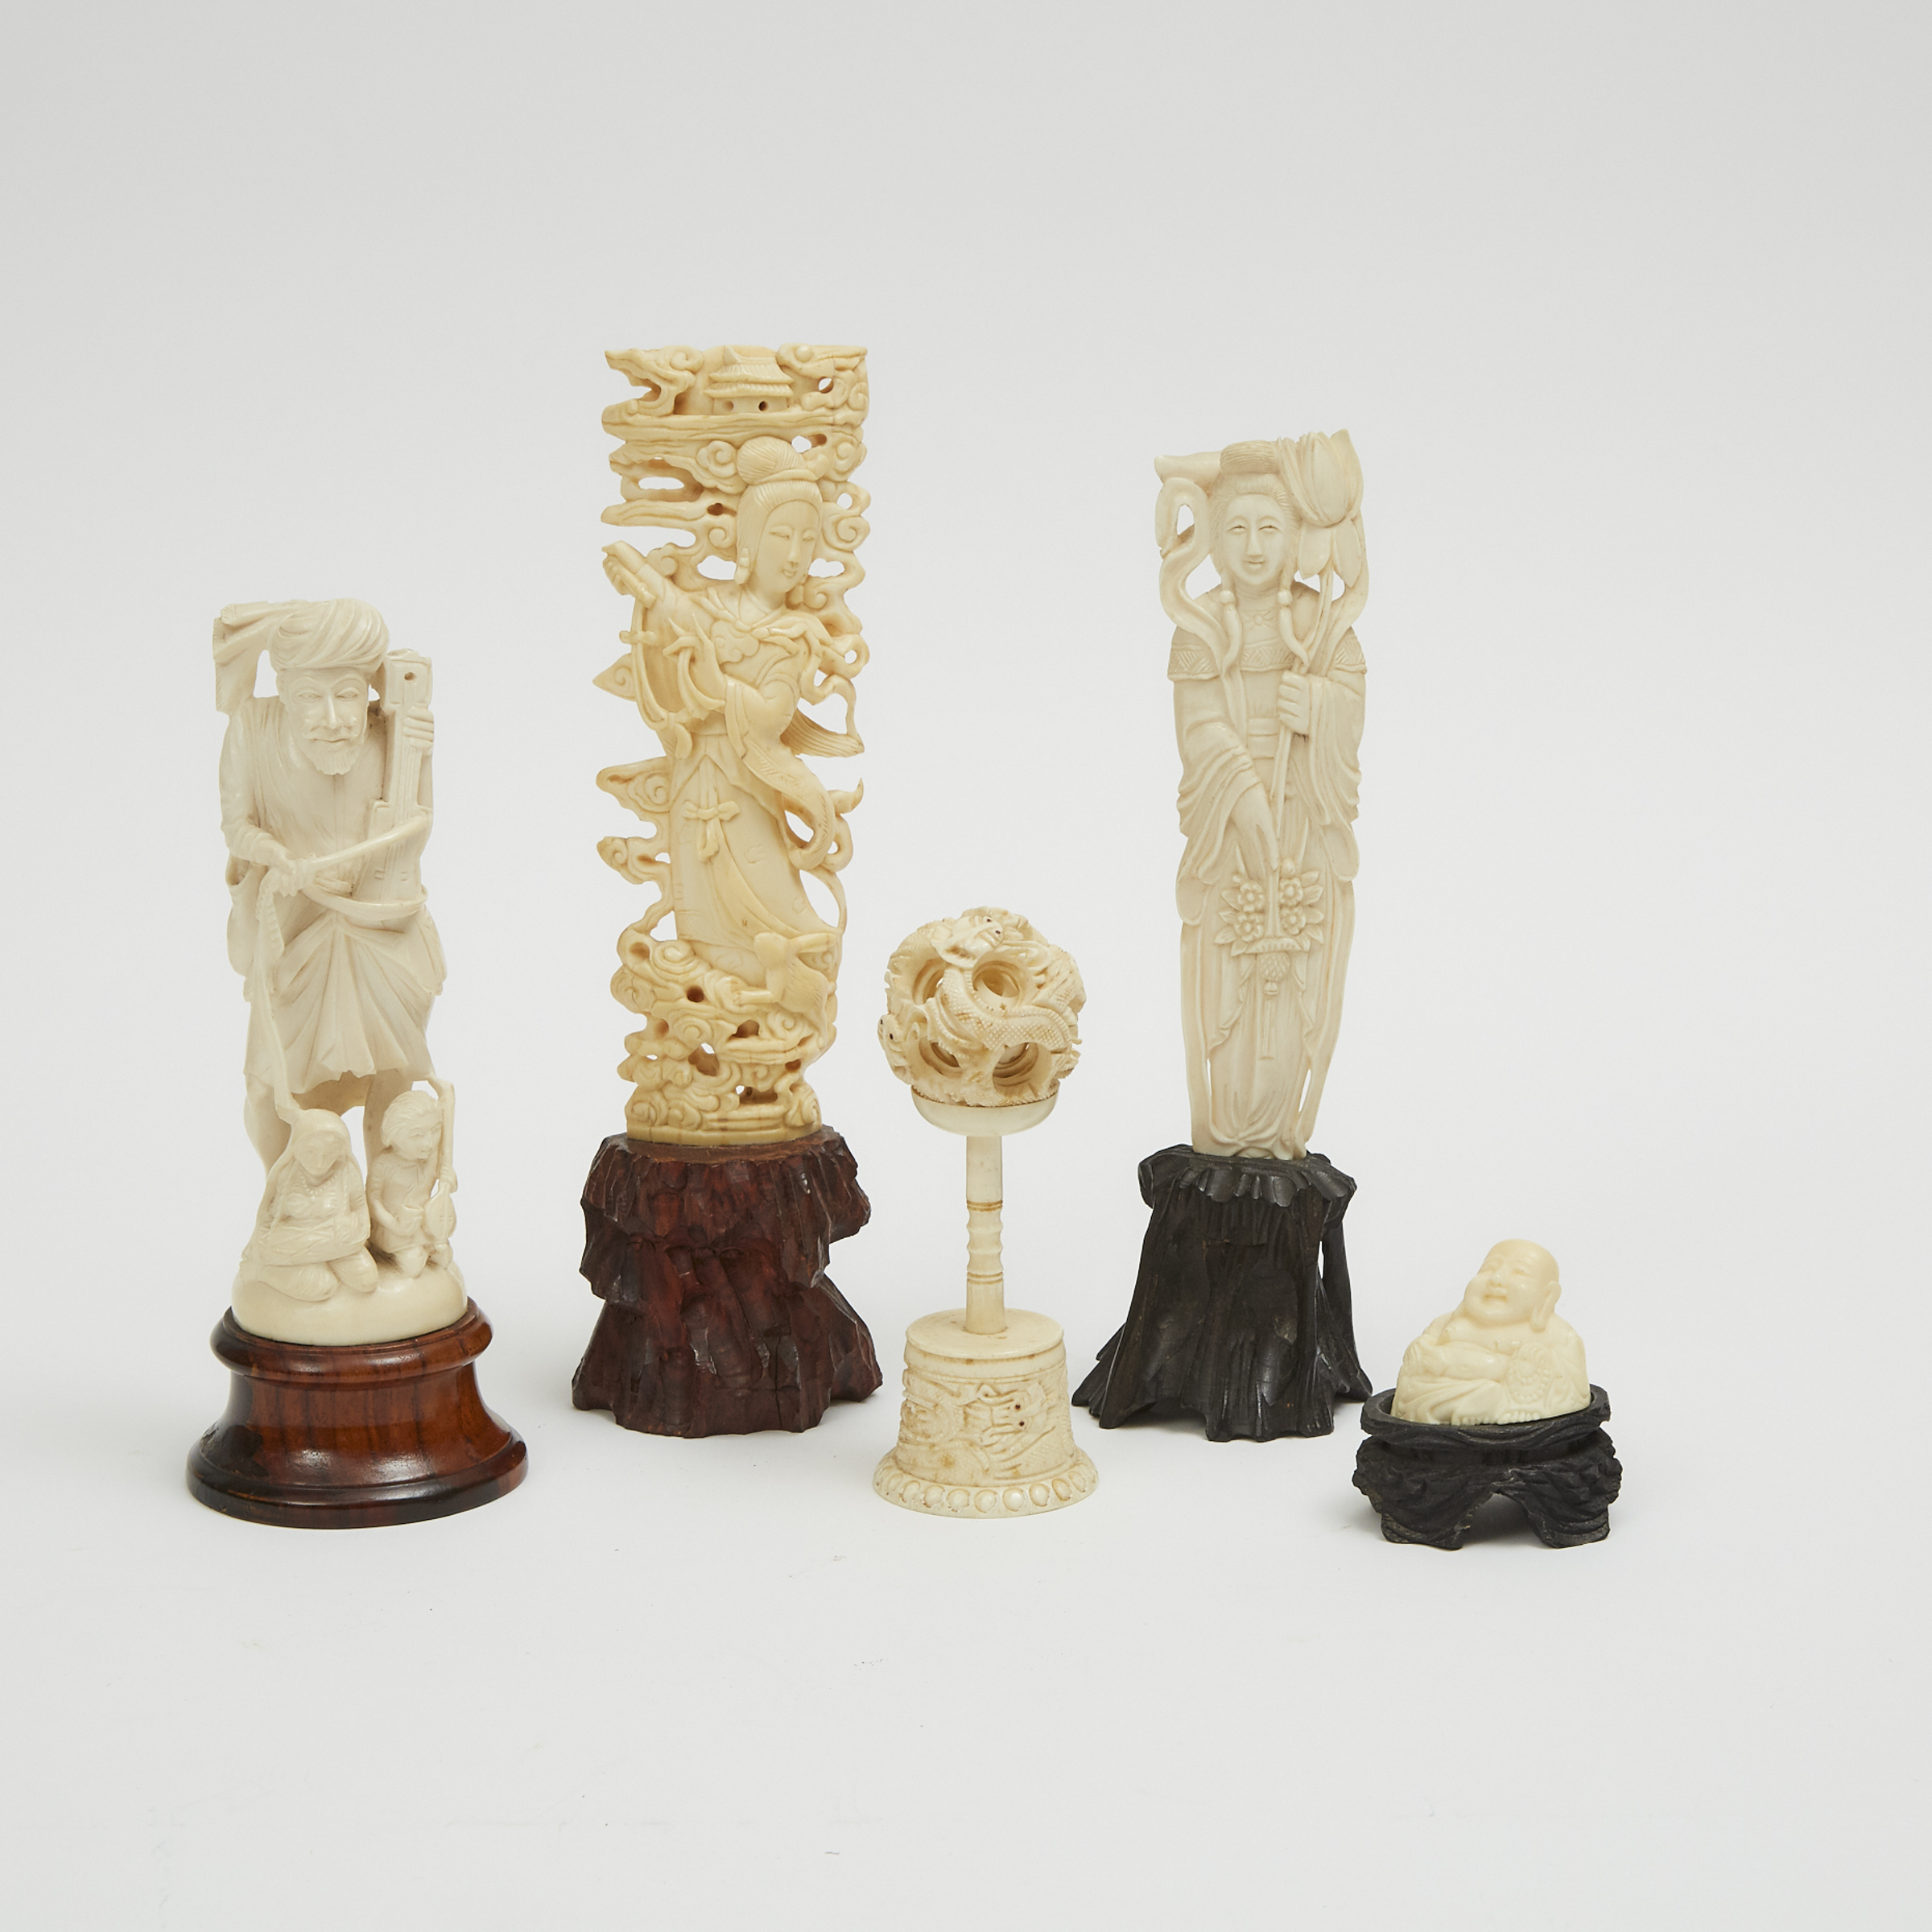 A Group of Five Ivory Carvings